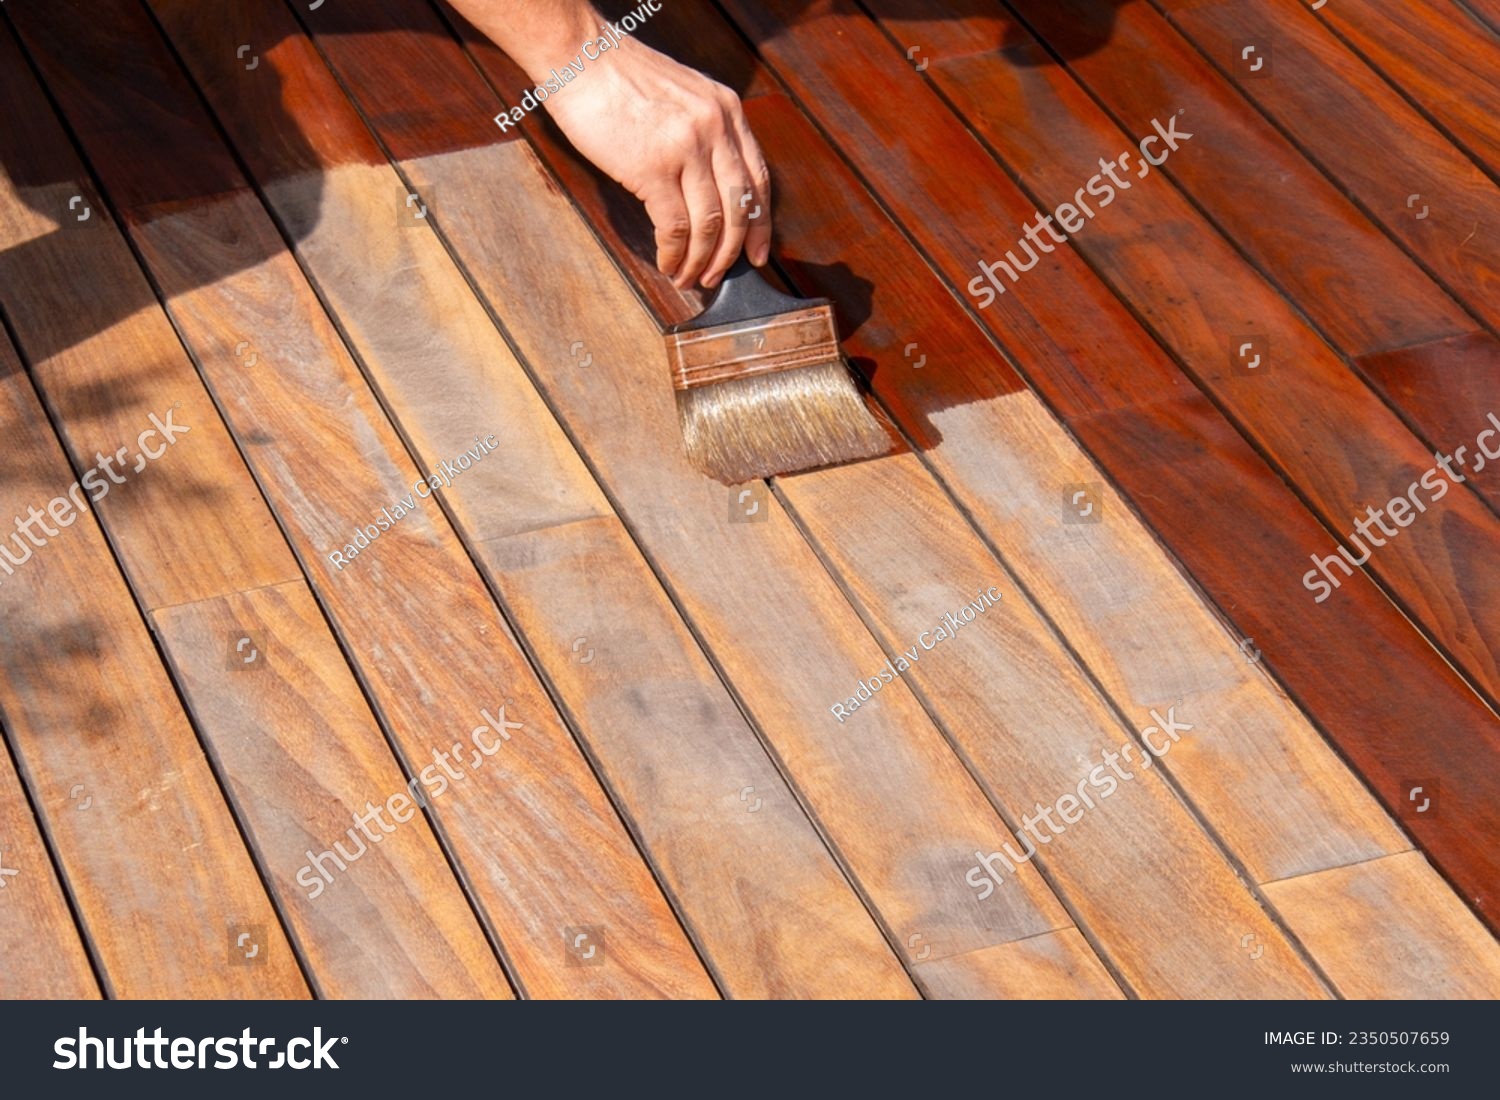 Woodworker refreshing wooden floor, worker's hand is applying decking oil on deck with a painting brush after sanding #2350507659